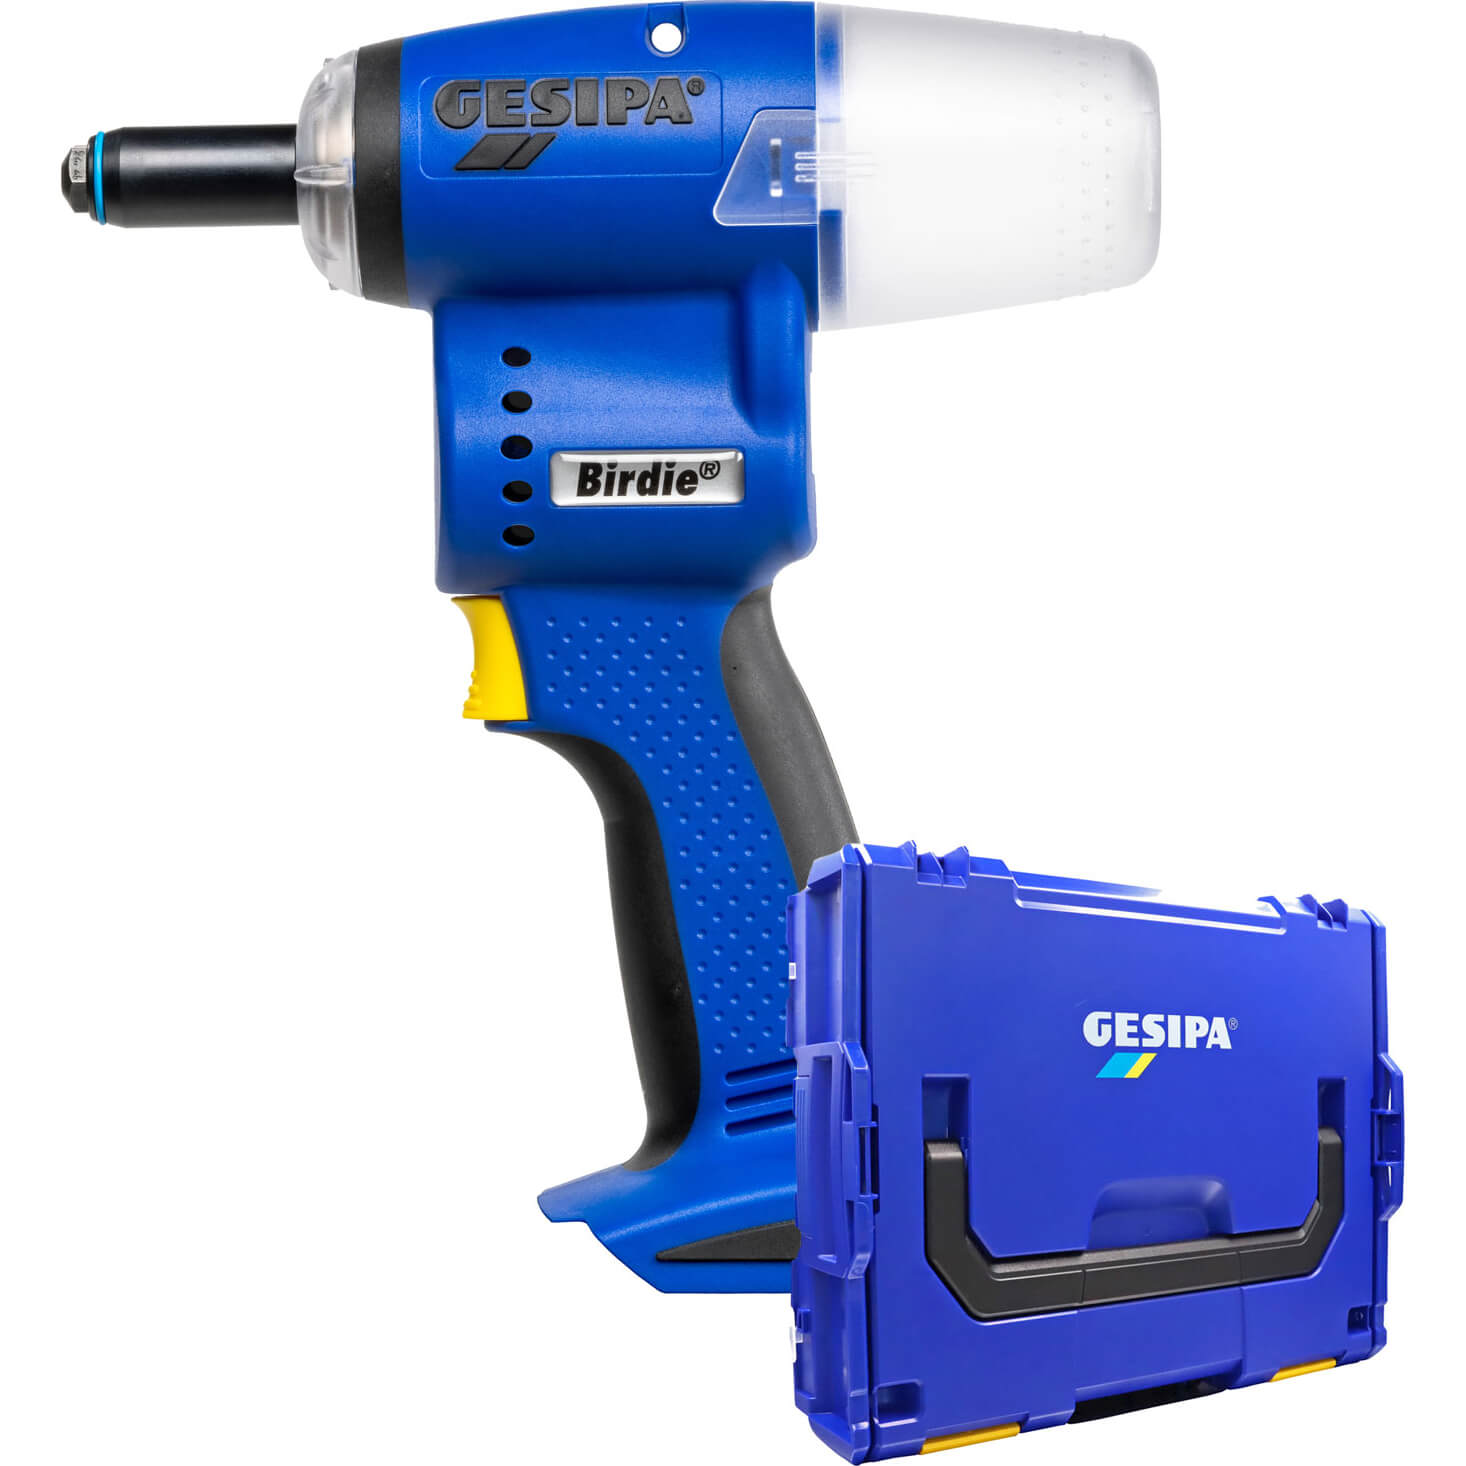 Image of Gesipa Birdie 18v Cordless Brushless Riveter Tool No Batteries No Charger Case